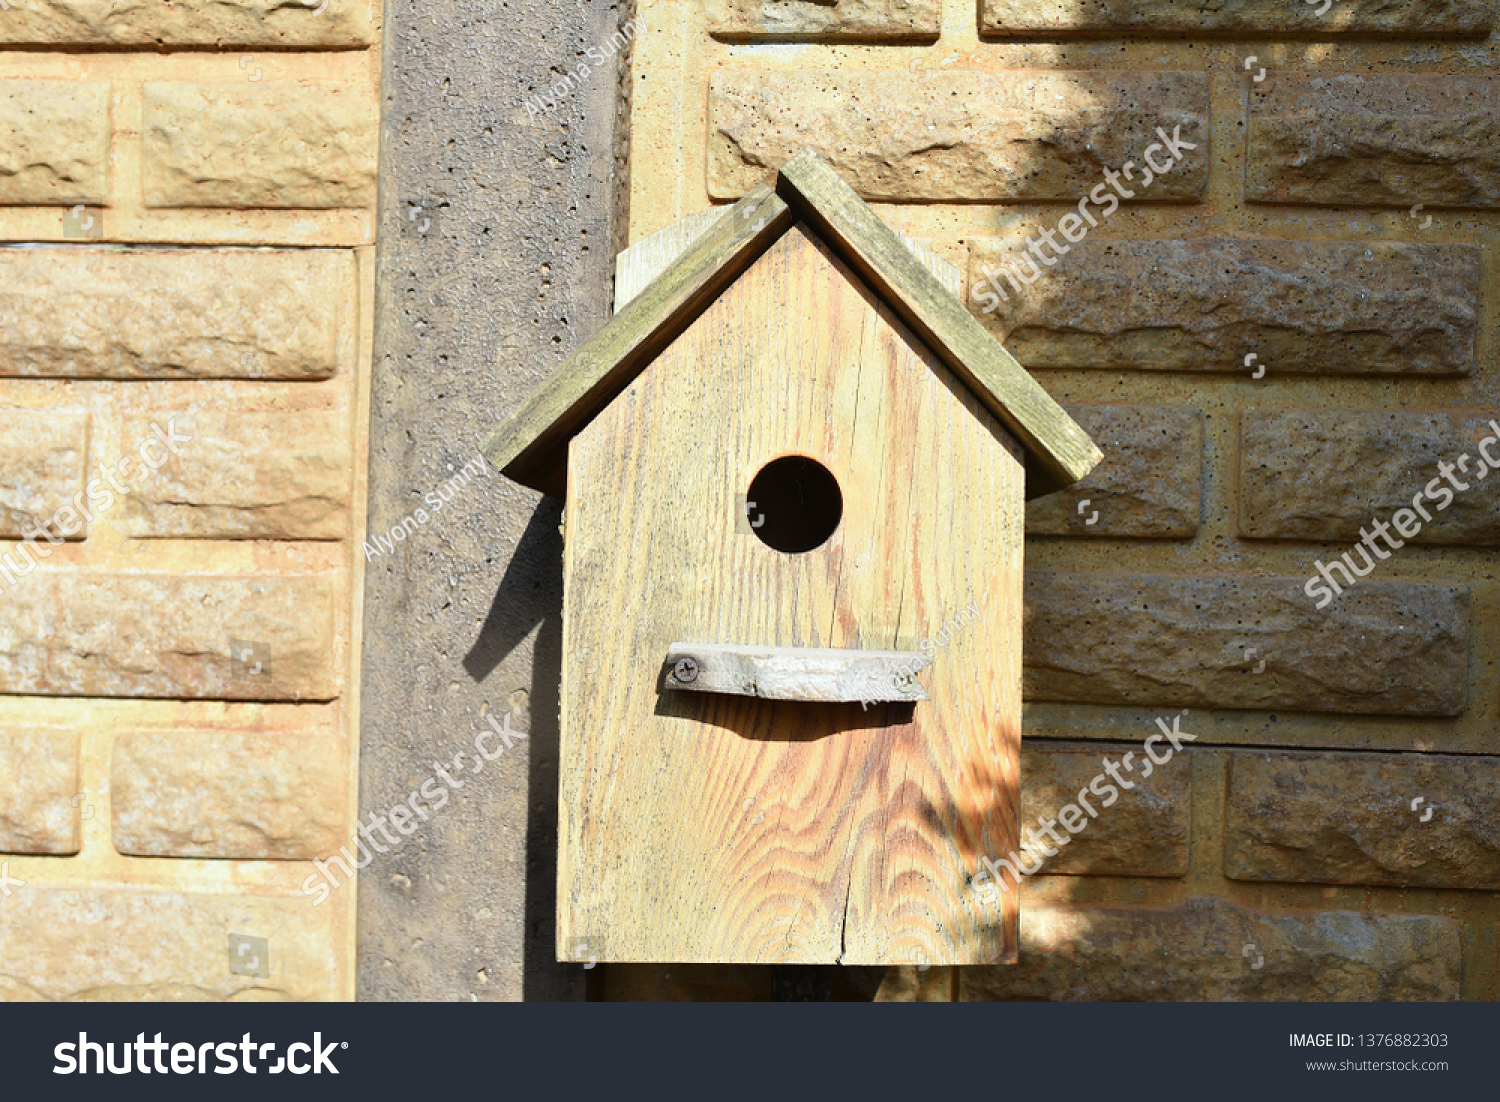 Closeup of a weathered birdhouse. wooden nesting box. #1376882303